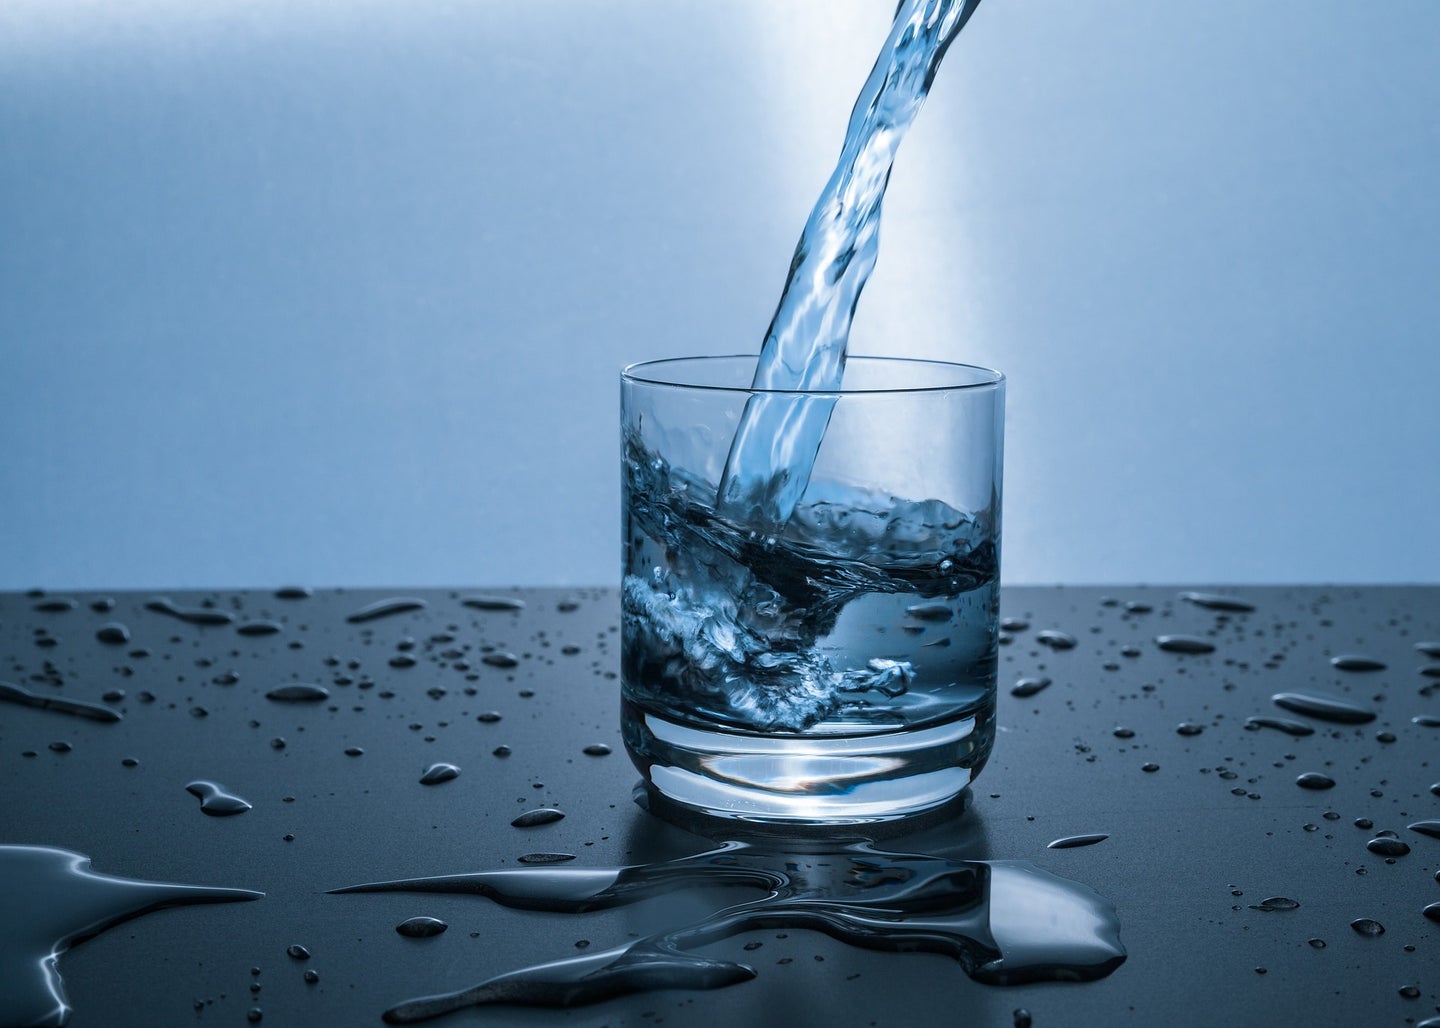 Water is poured into a short, clear glass from above against a blue background.